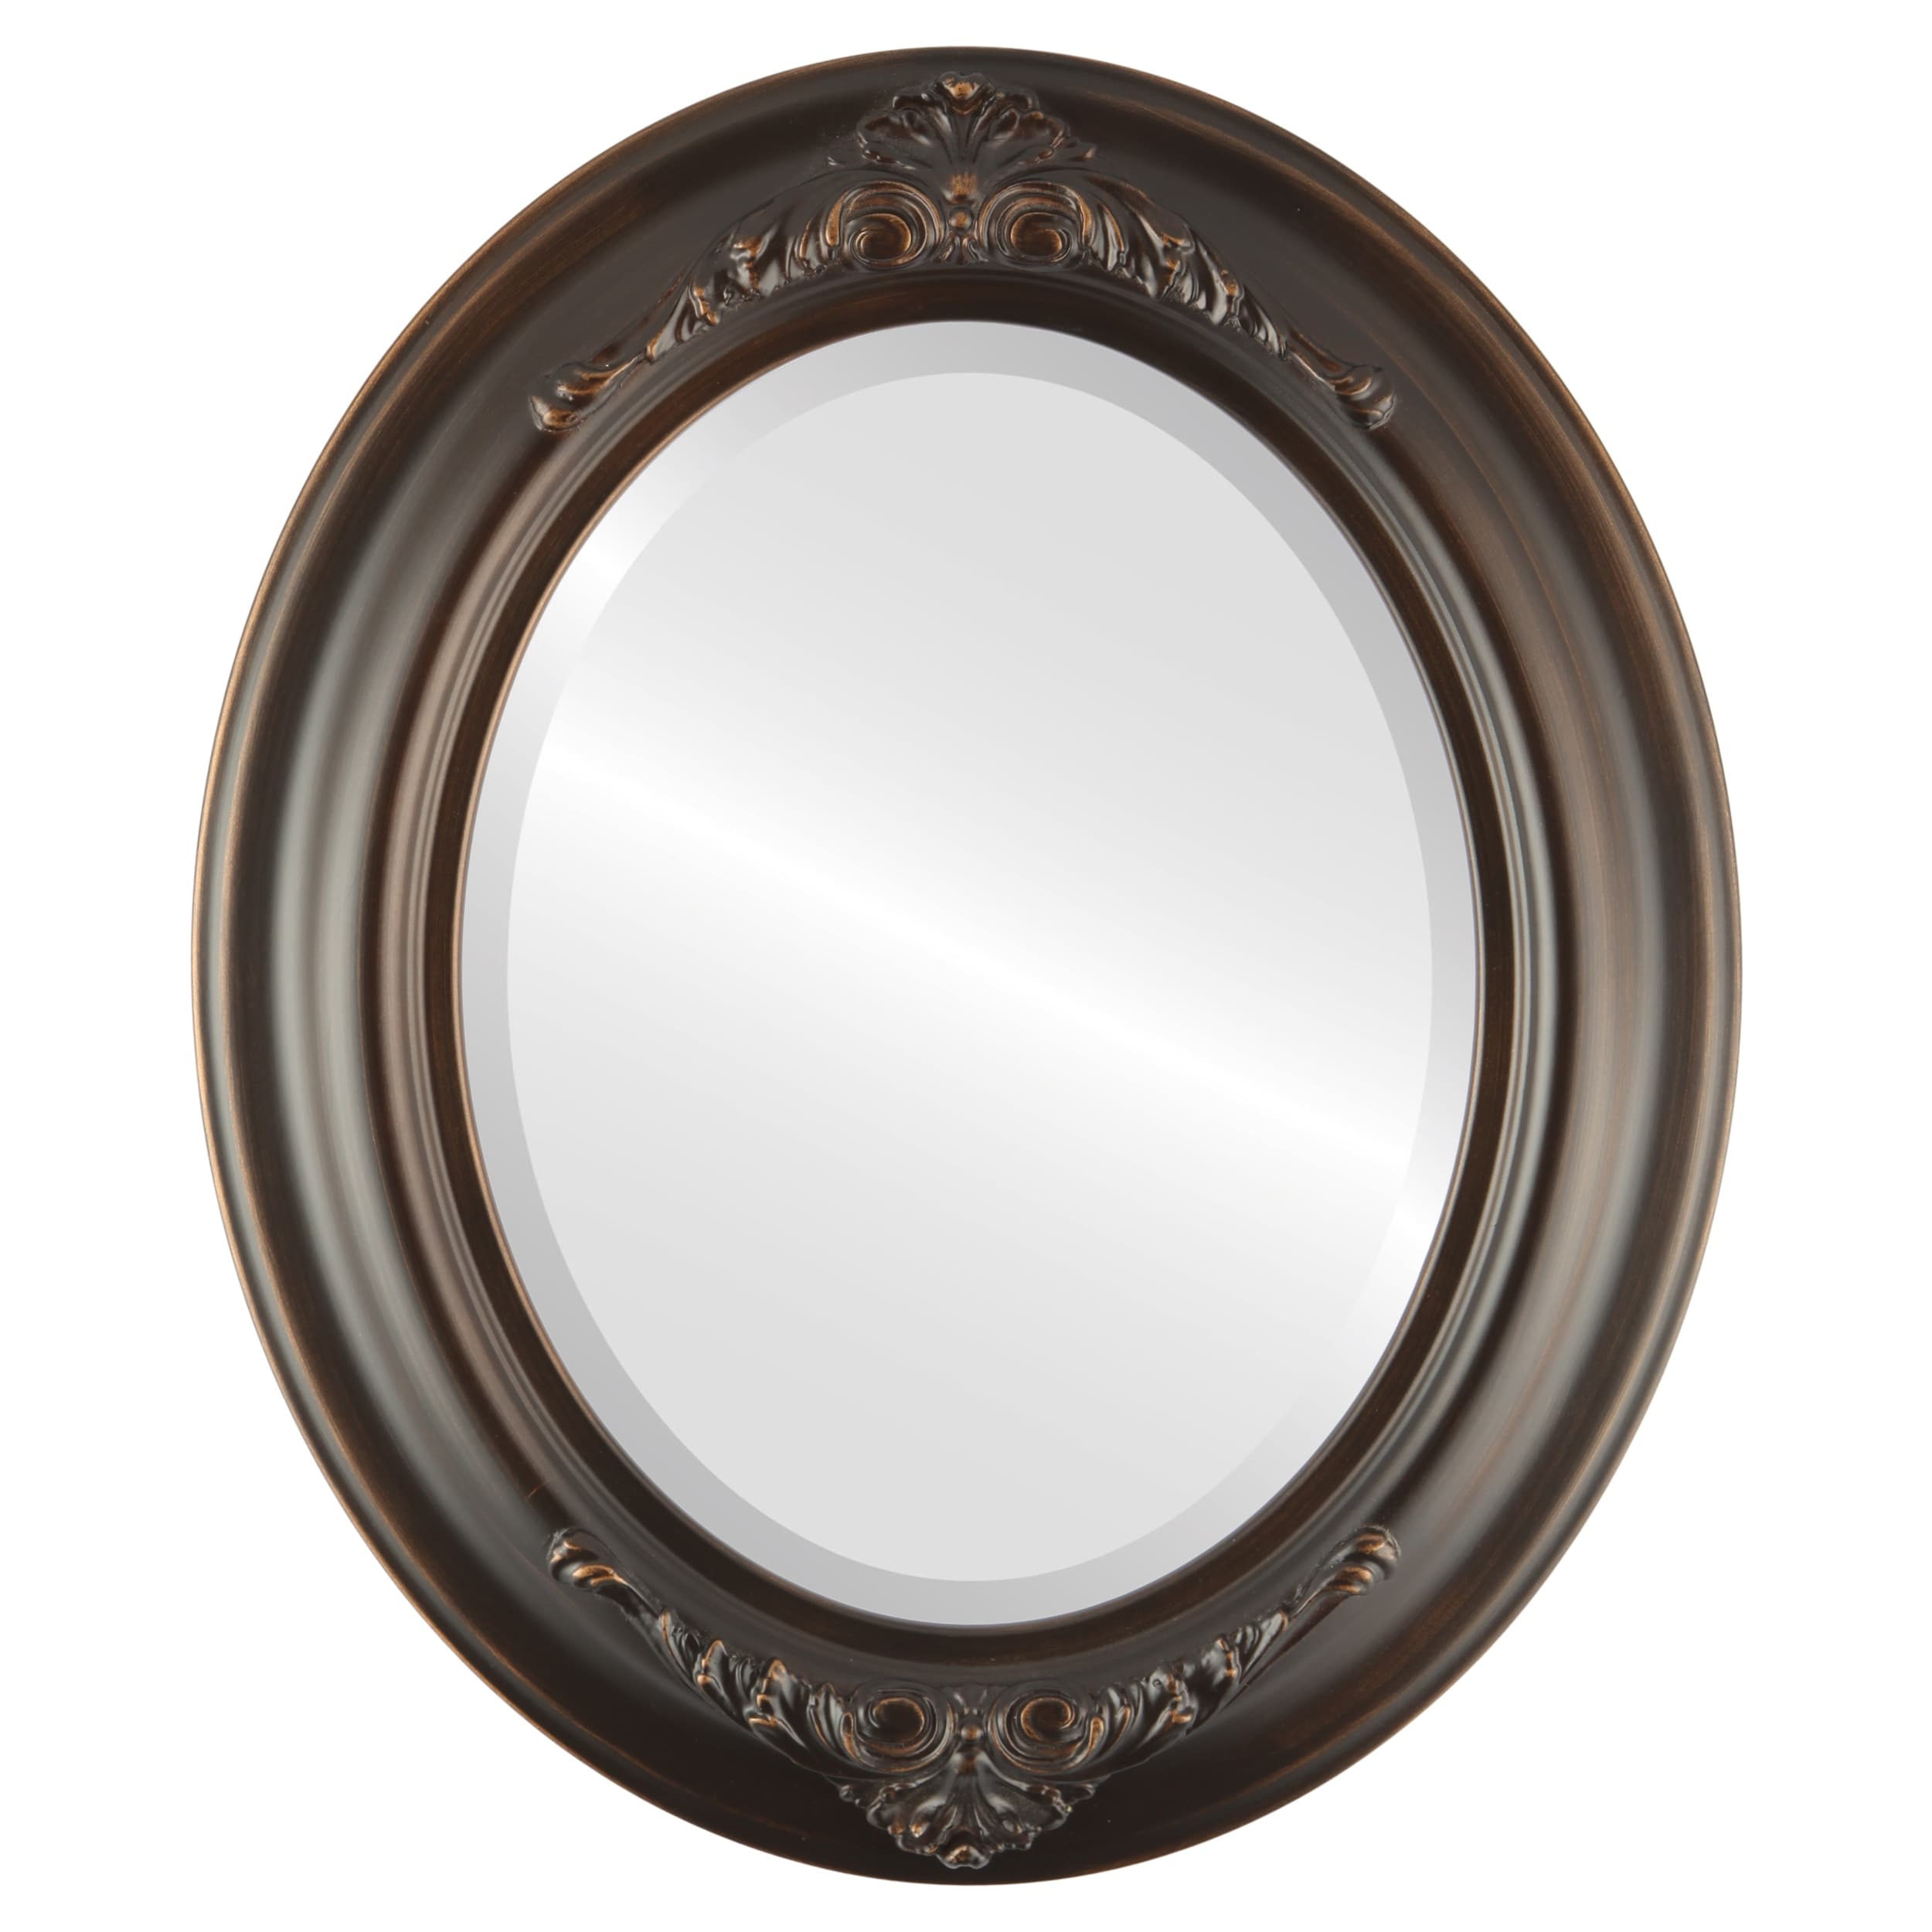 Oval Beveled Wall Mirror for Home Decor Santa Fe Style Rubbed Bronze - 4